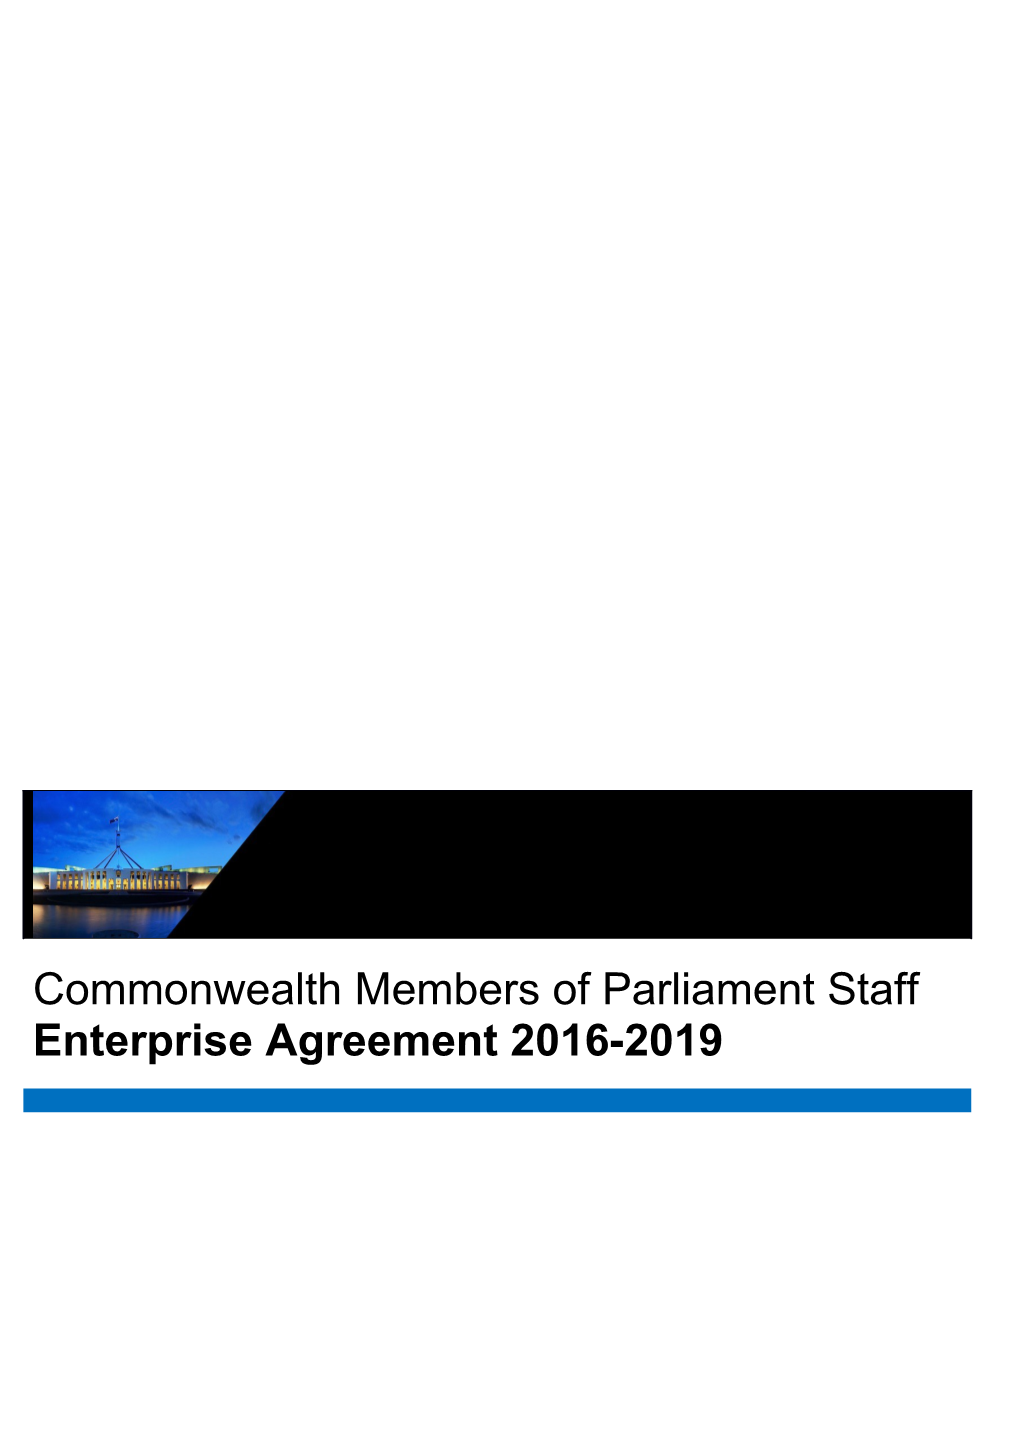 Proposed Commonwealth Members of Parliament Staff Enterprise Agreement 2016-2019